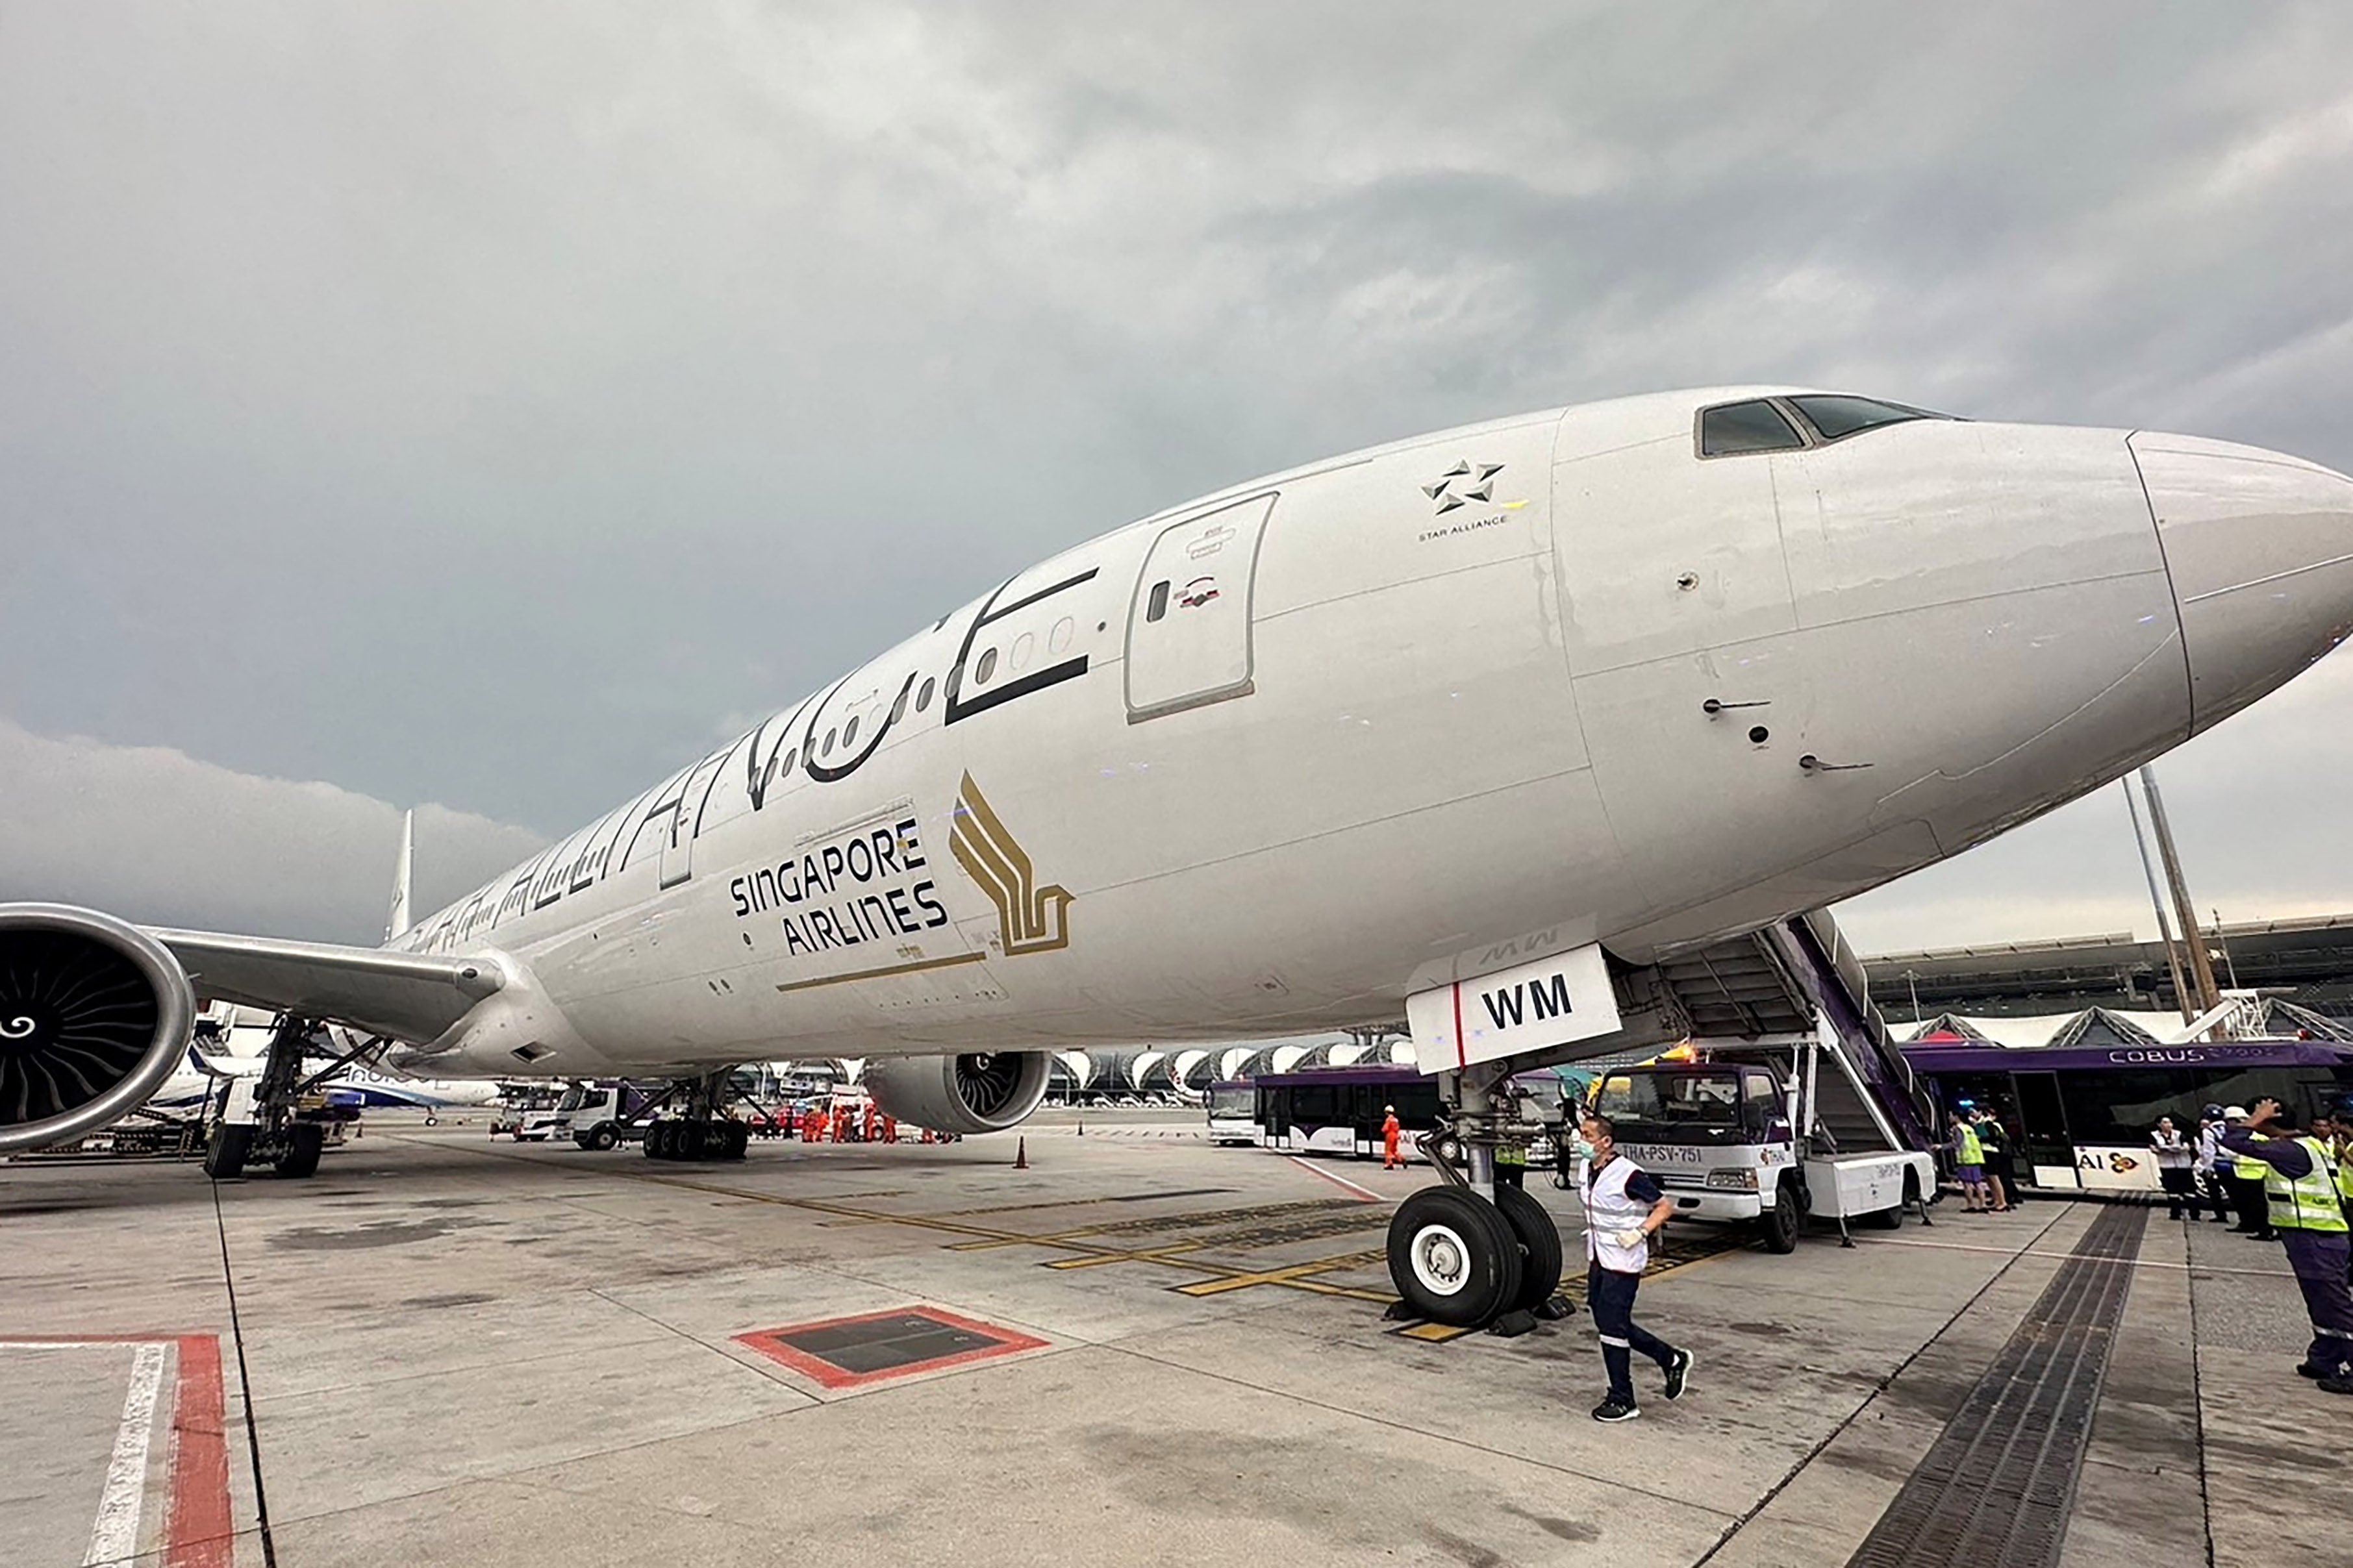 A Singapore Airlines aircraft is seen on the tarmac after requesting an emergency landing at Bangkok’s Suvarnabhumi International Airport on May 21. Photo: Reuters